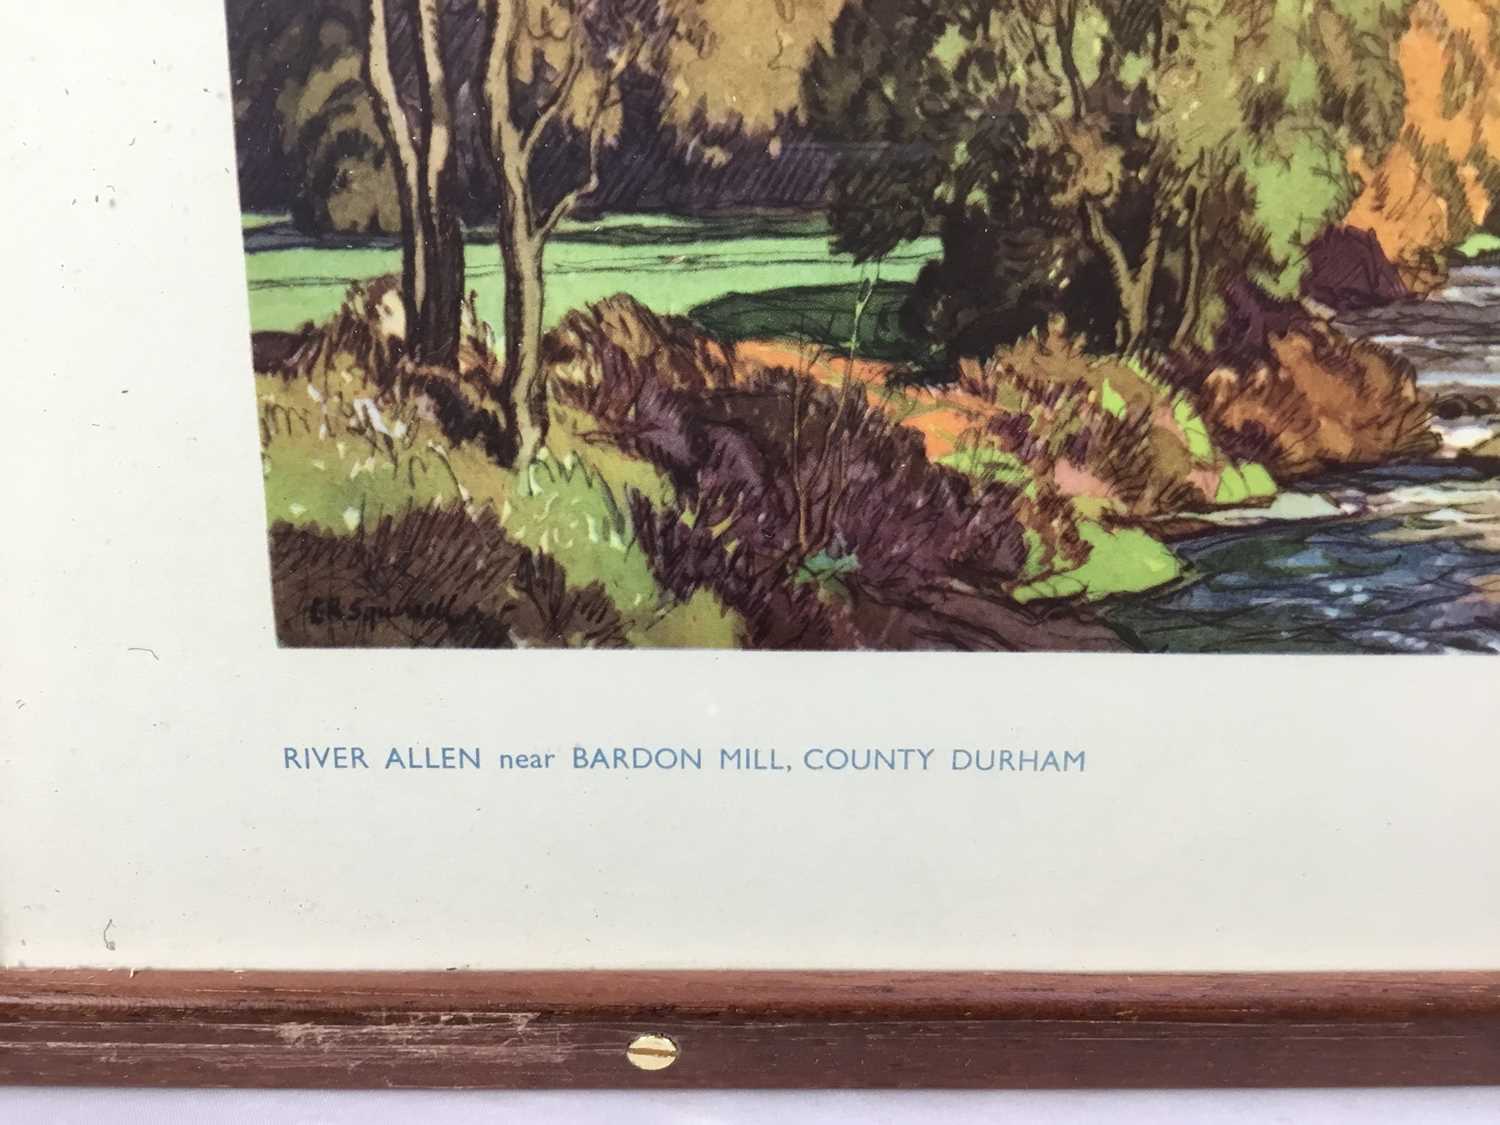 Original Railway Carriage Print/ Poster: "RIVER ALLEN, BARDON MILL, (NORTHUMBERLAND)”. Artwork by Le - Image 5 of 7